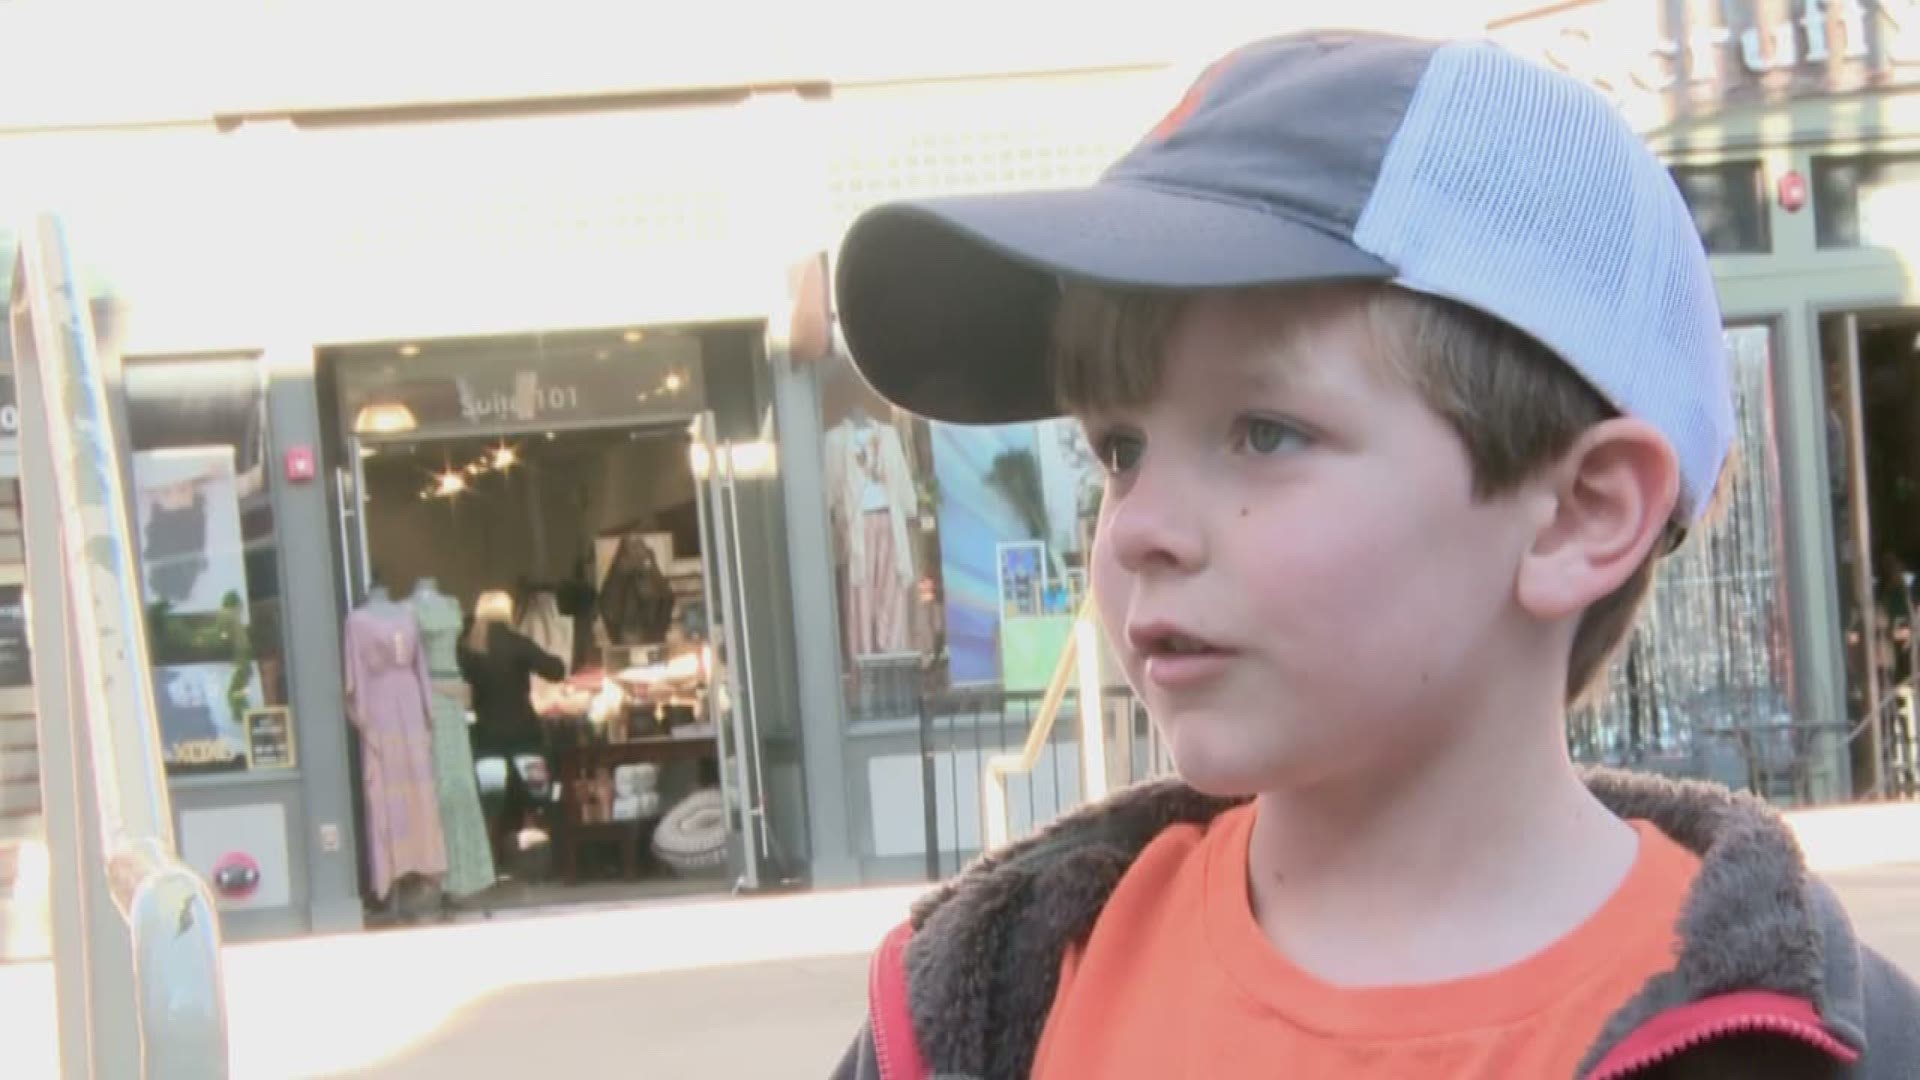 Vols fans come in all shapes and sizes from the smallest to the most seasoned, so we caught up with a few to get an inside look at what they thought about Friday's game.